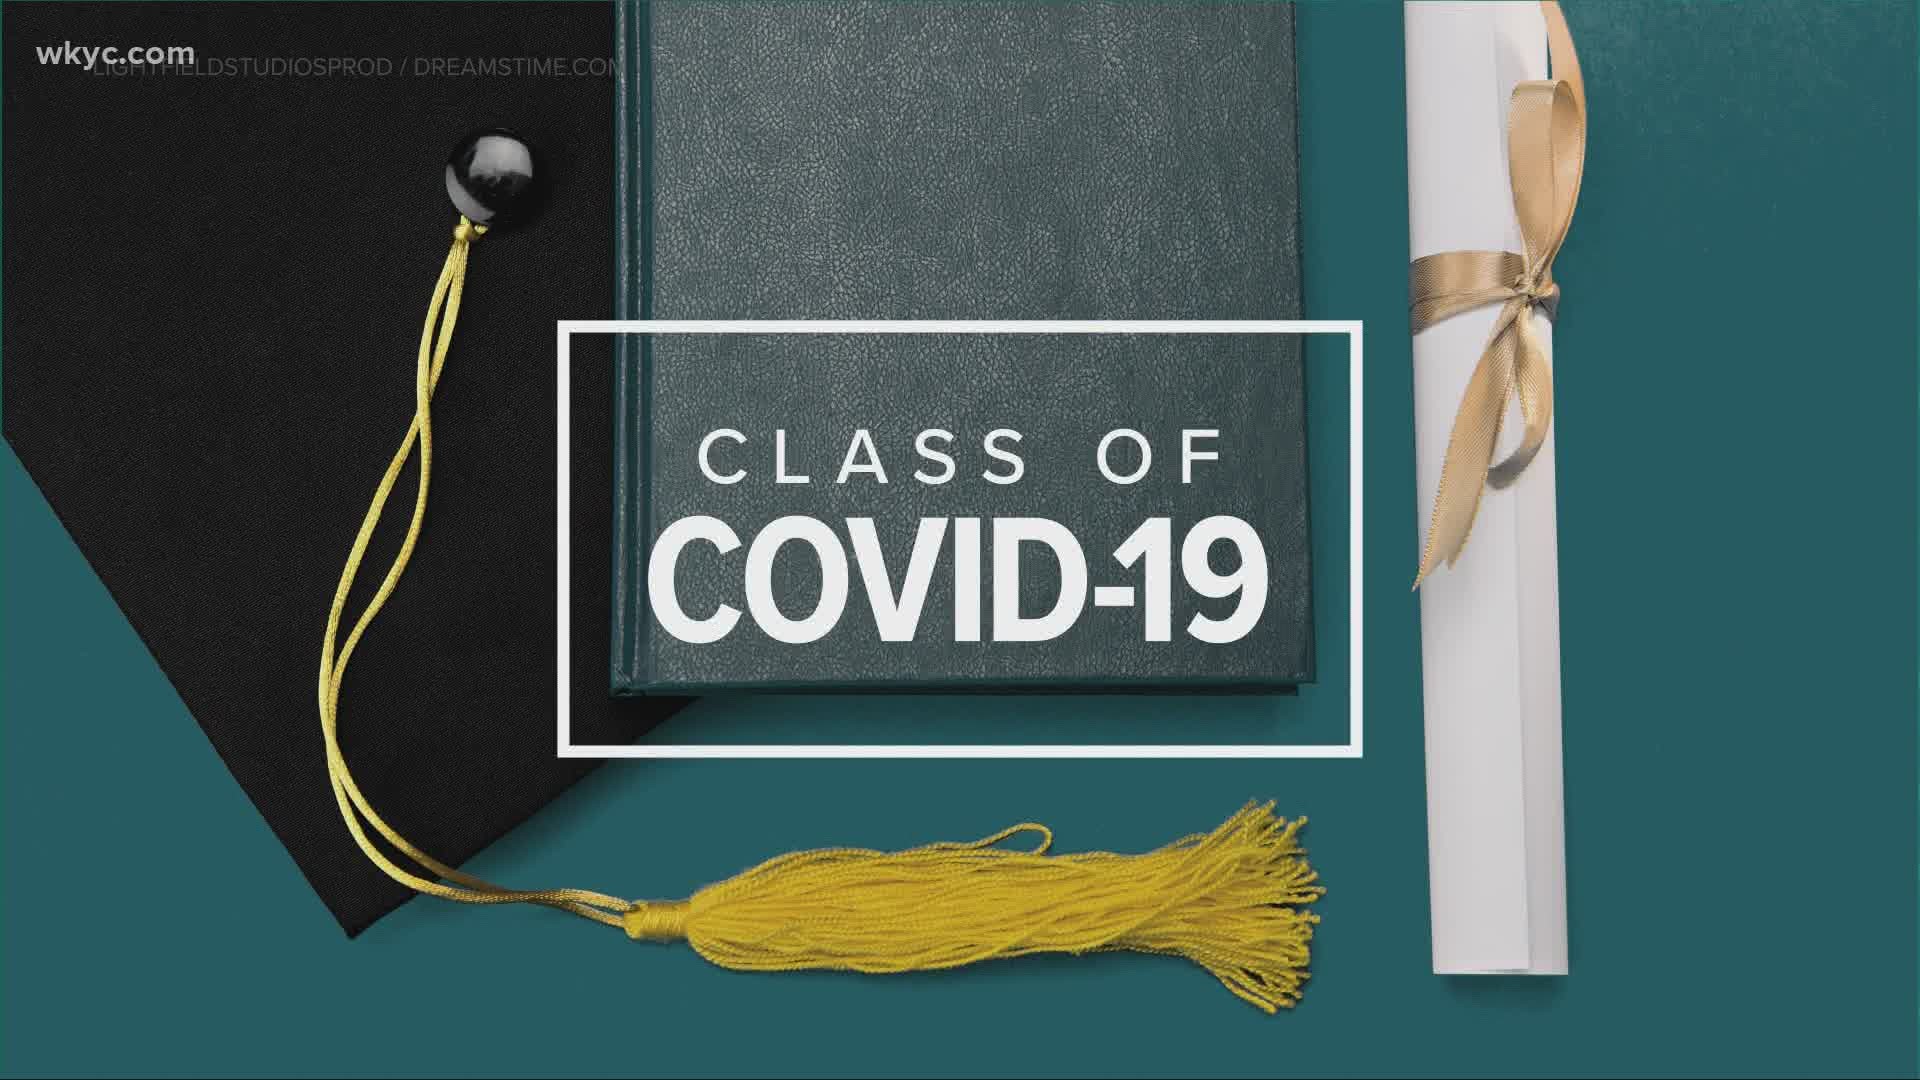 The class of COVID-19. Lindsay Buckingham shares the story of three seniors copying with the loss of their senior year.